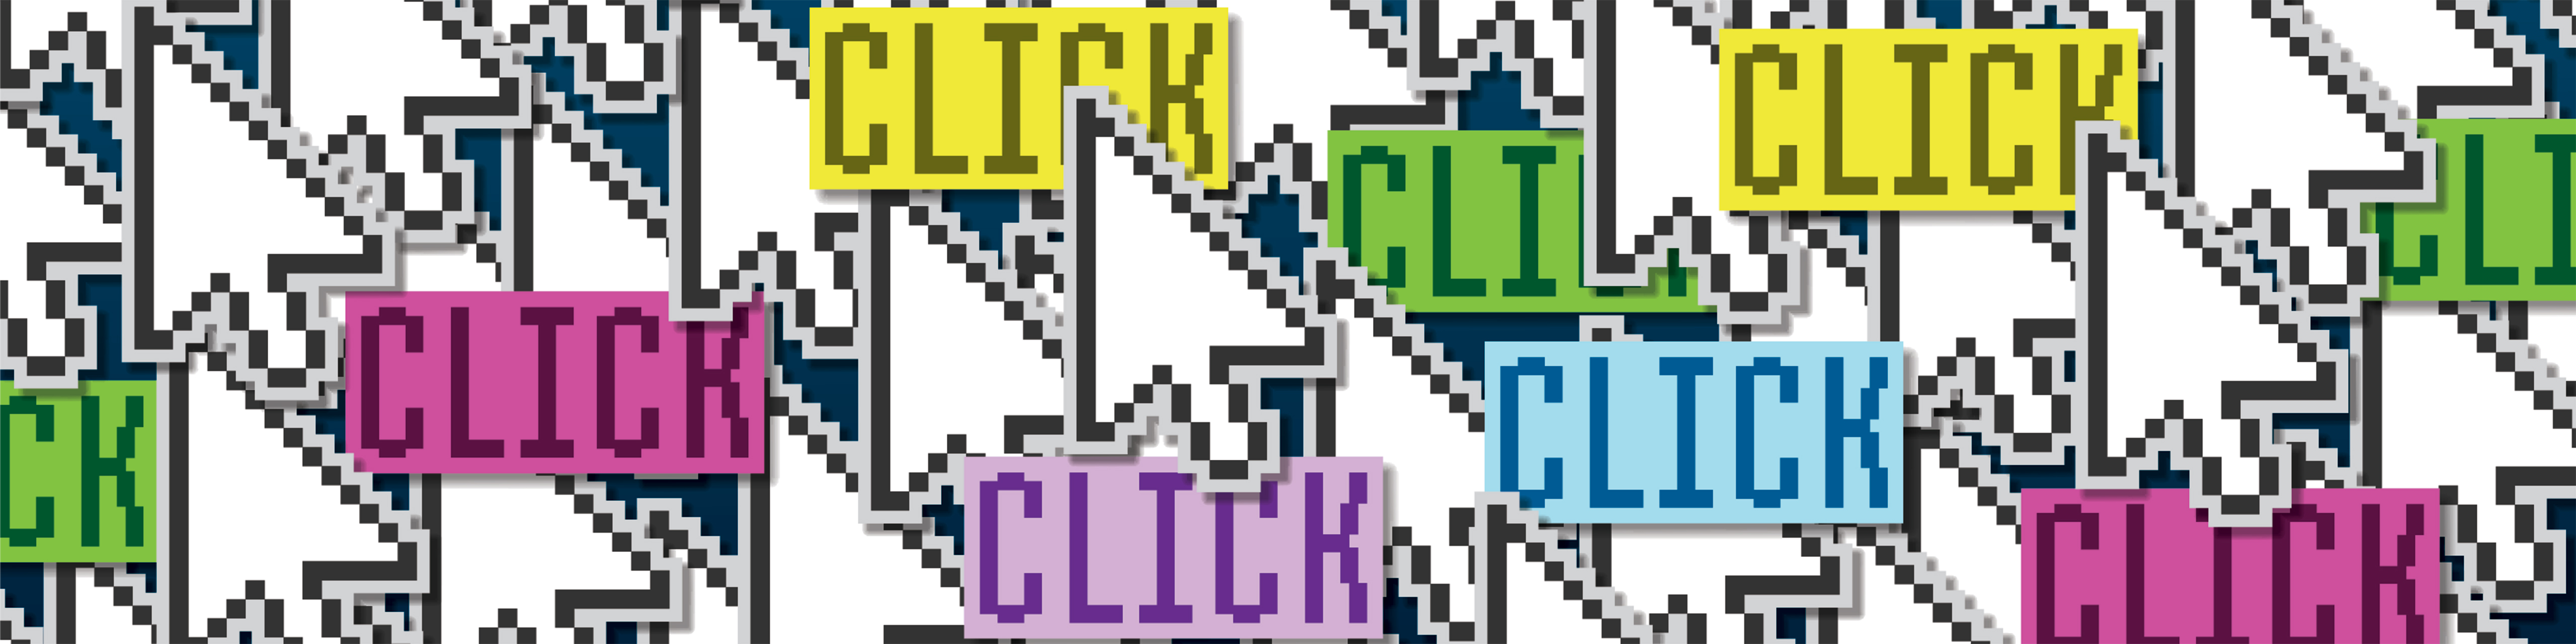 Pattern of mouse cursors with the word click rendered in different colors